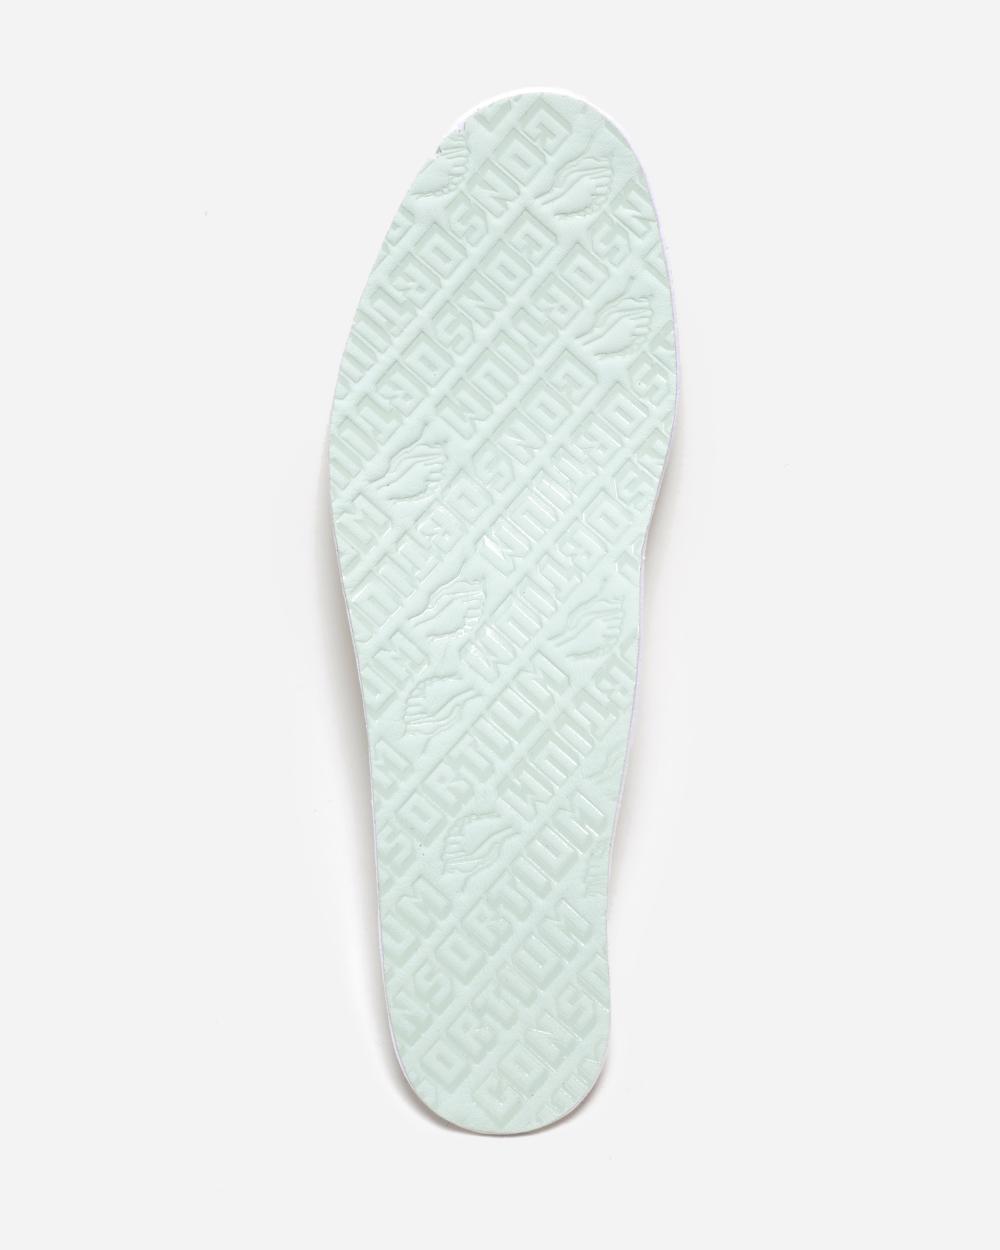 Naked Adidas Ultra Boost BB1141 Insole